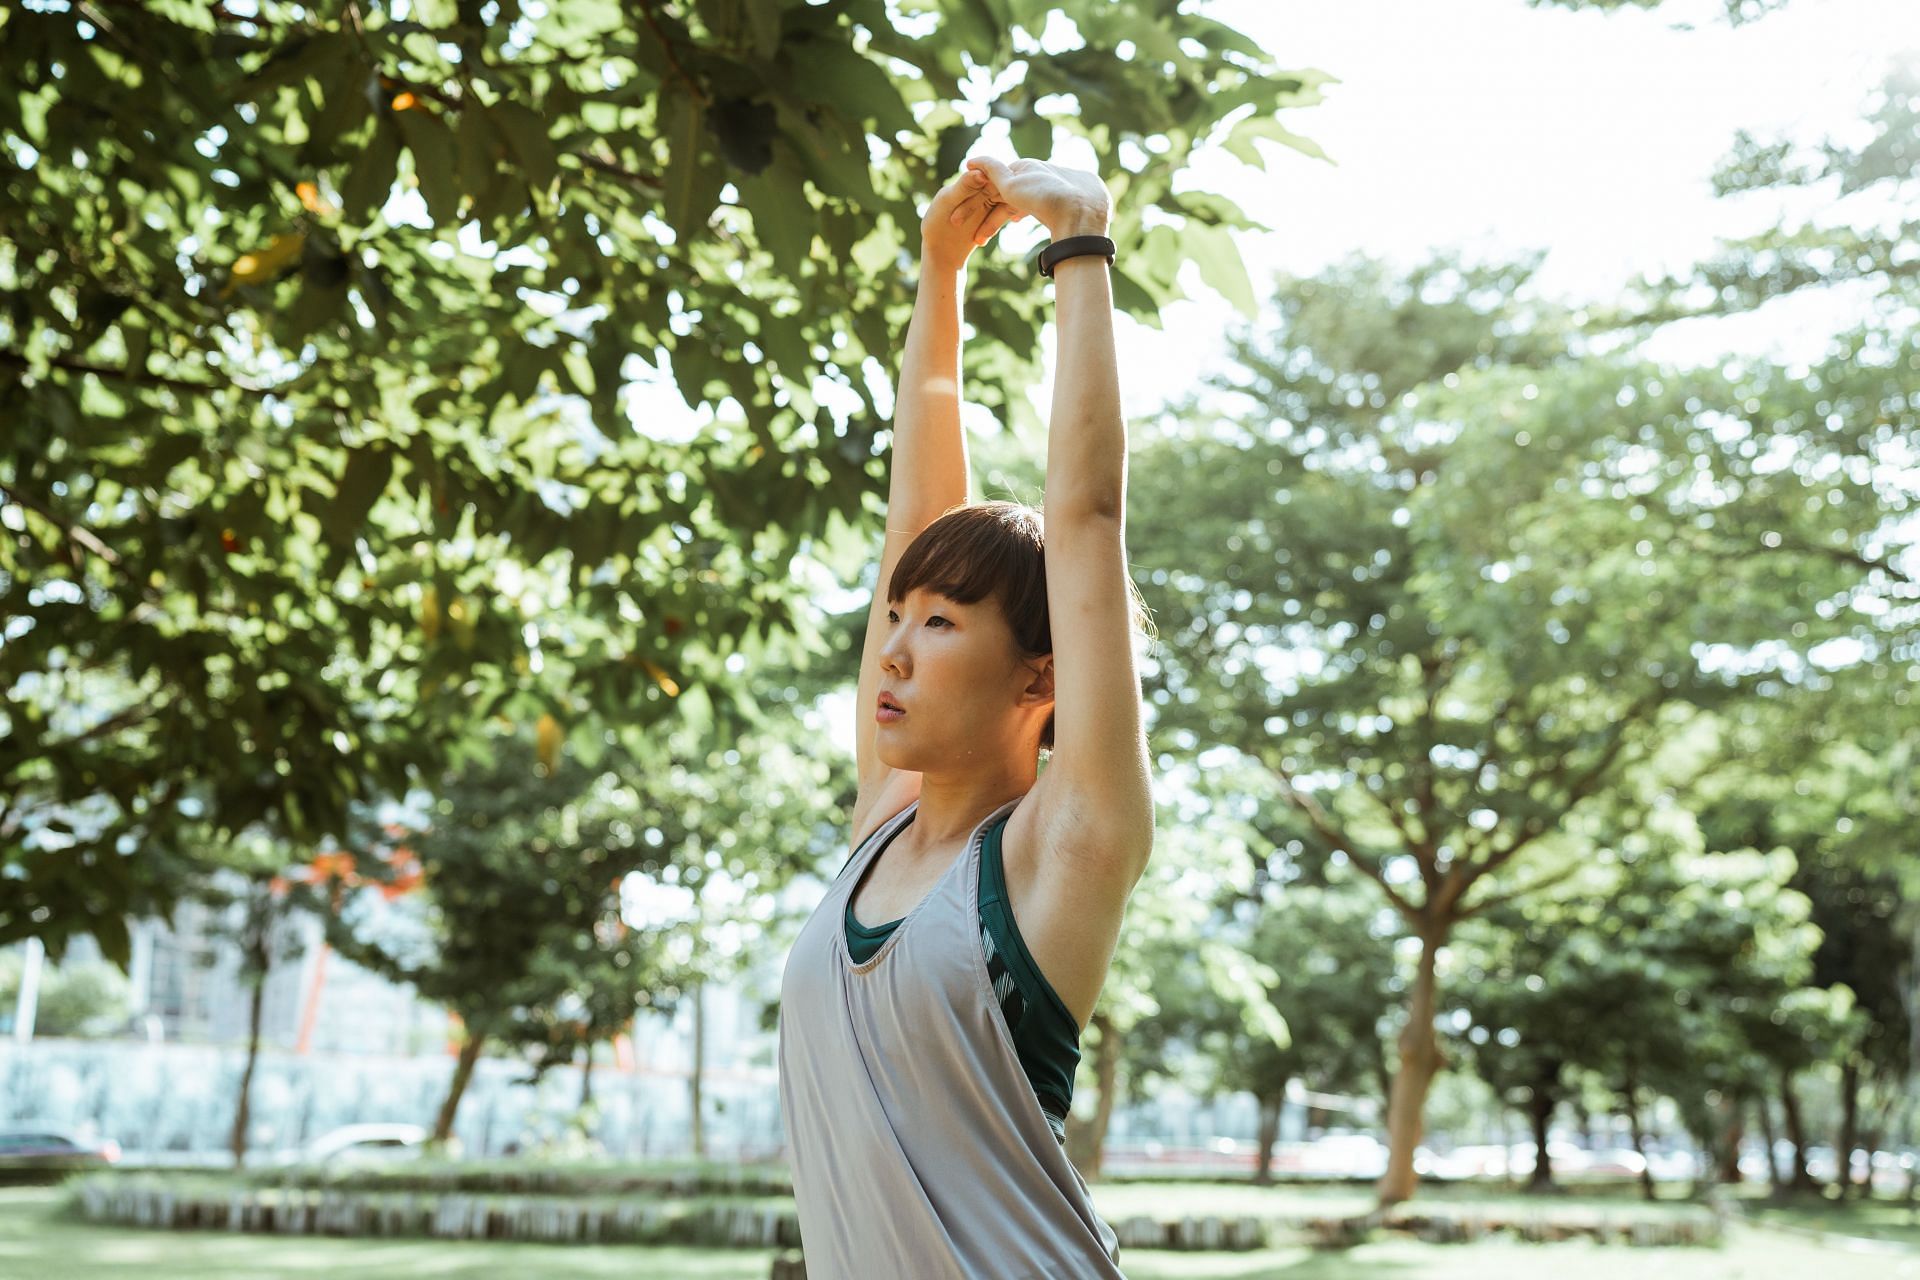 Arm circles and arm scissors will help you tone your arms (Image via Pexels/Ketut Subiyanto)